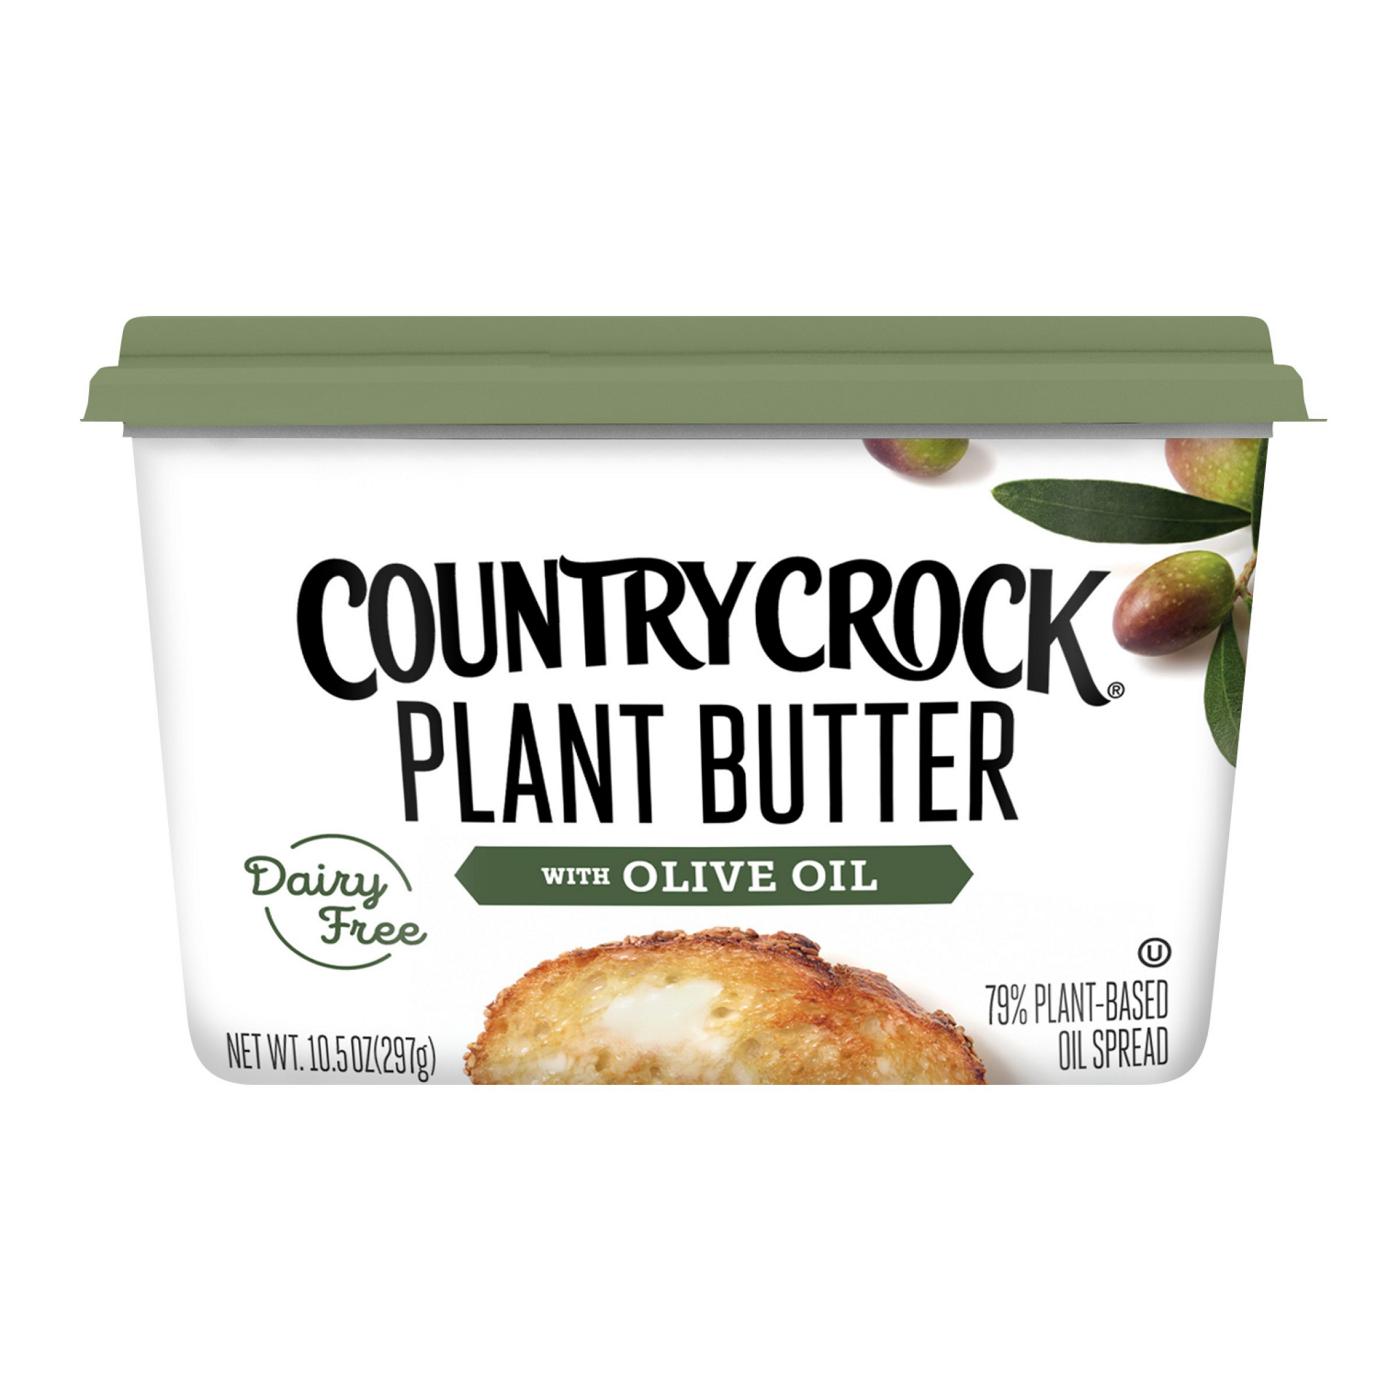 Country Crock Dairy Free Plant Butter with Olive Oil Spread; image 1 of 10